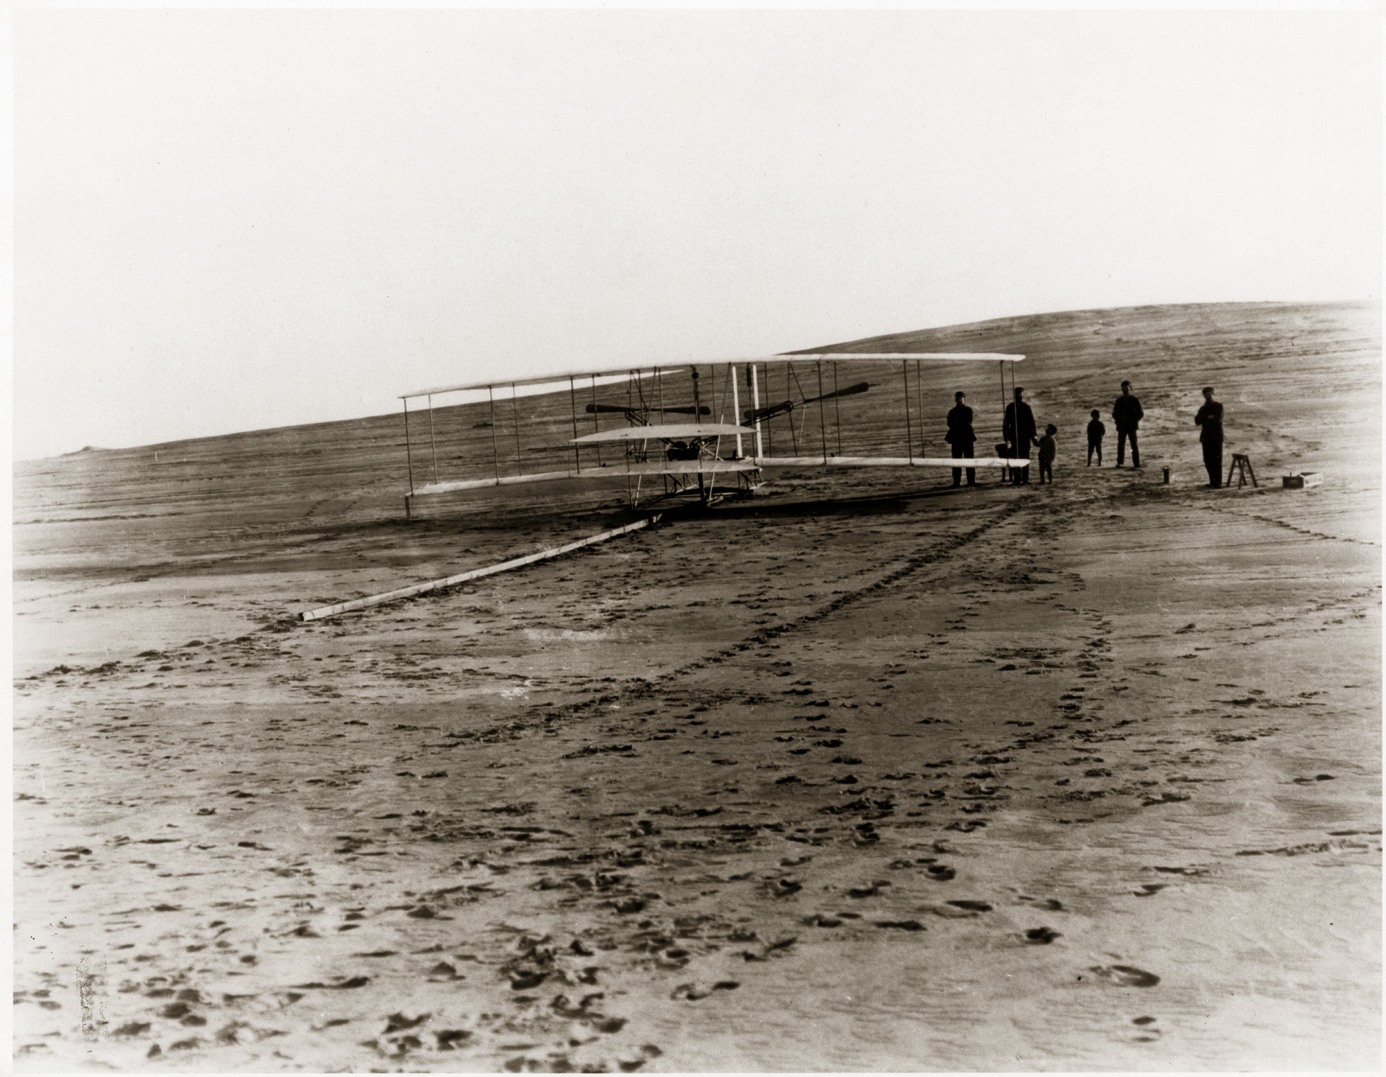 A biplane sits on a long wooden rail on the ground. A group of people stand behind it.